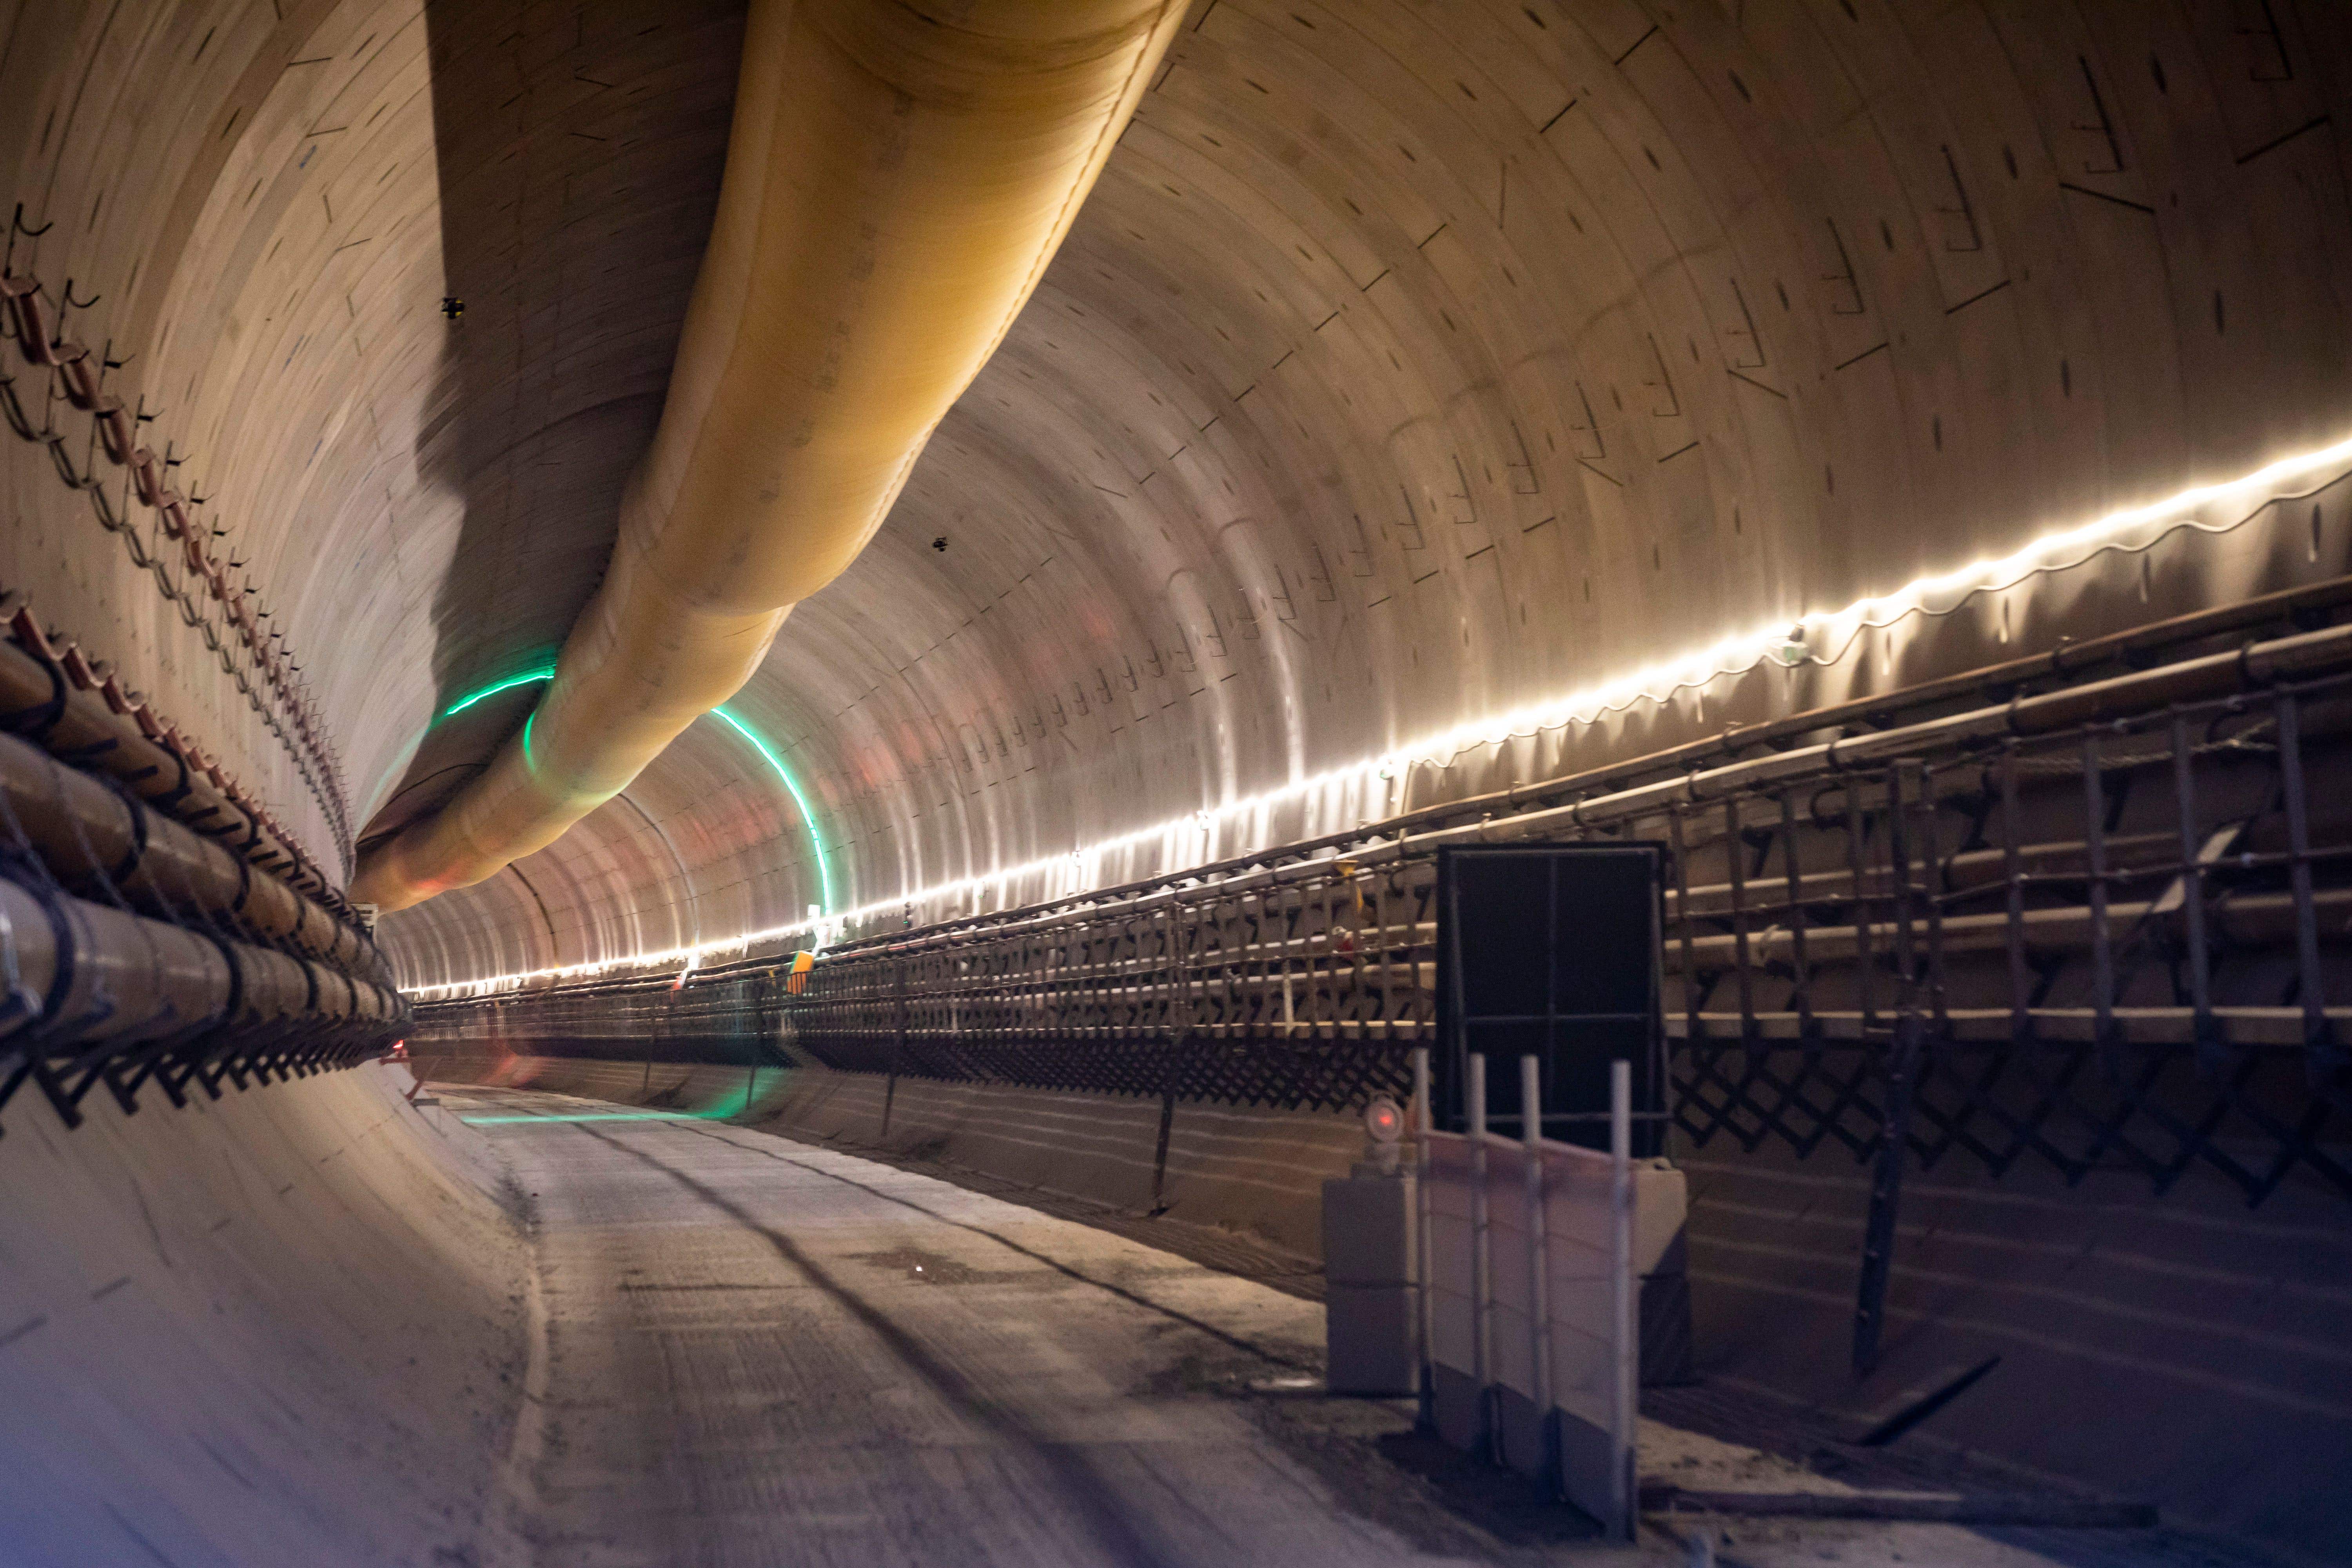 Giant machines digging HS2’s longest tunnel have passed the half-way point, according to the firm building the high-speed railway (HS2 Ltd/PA)